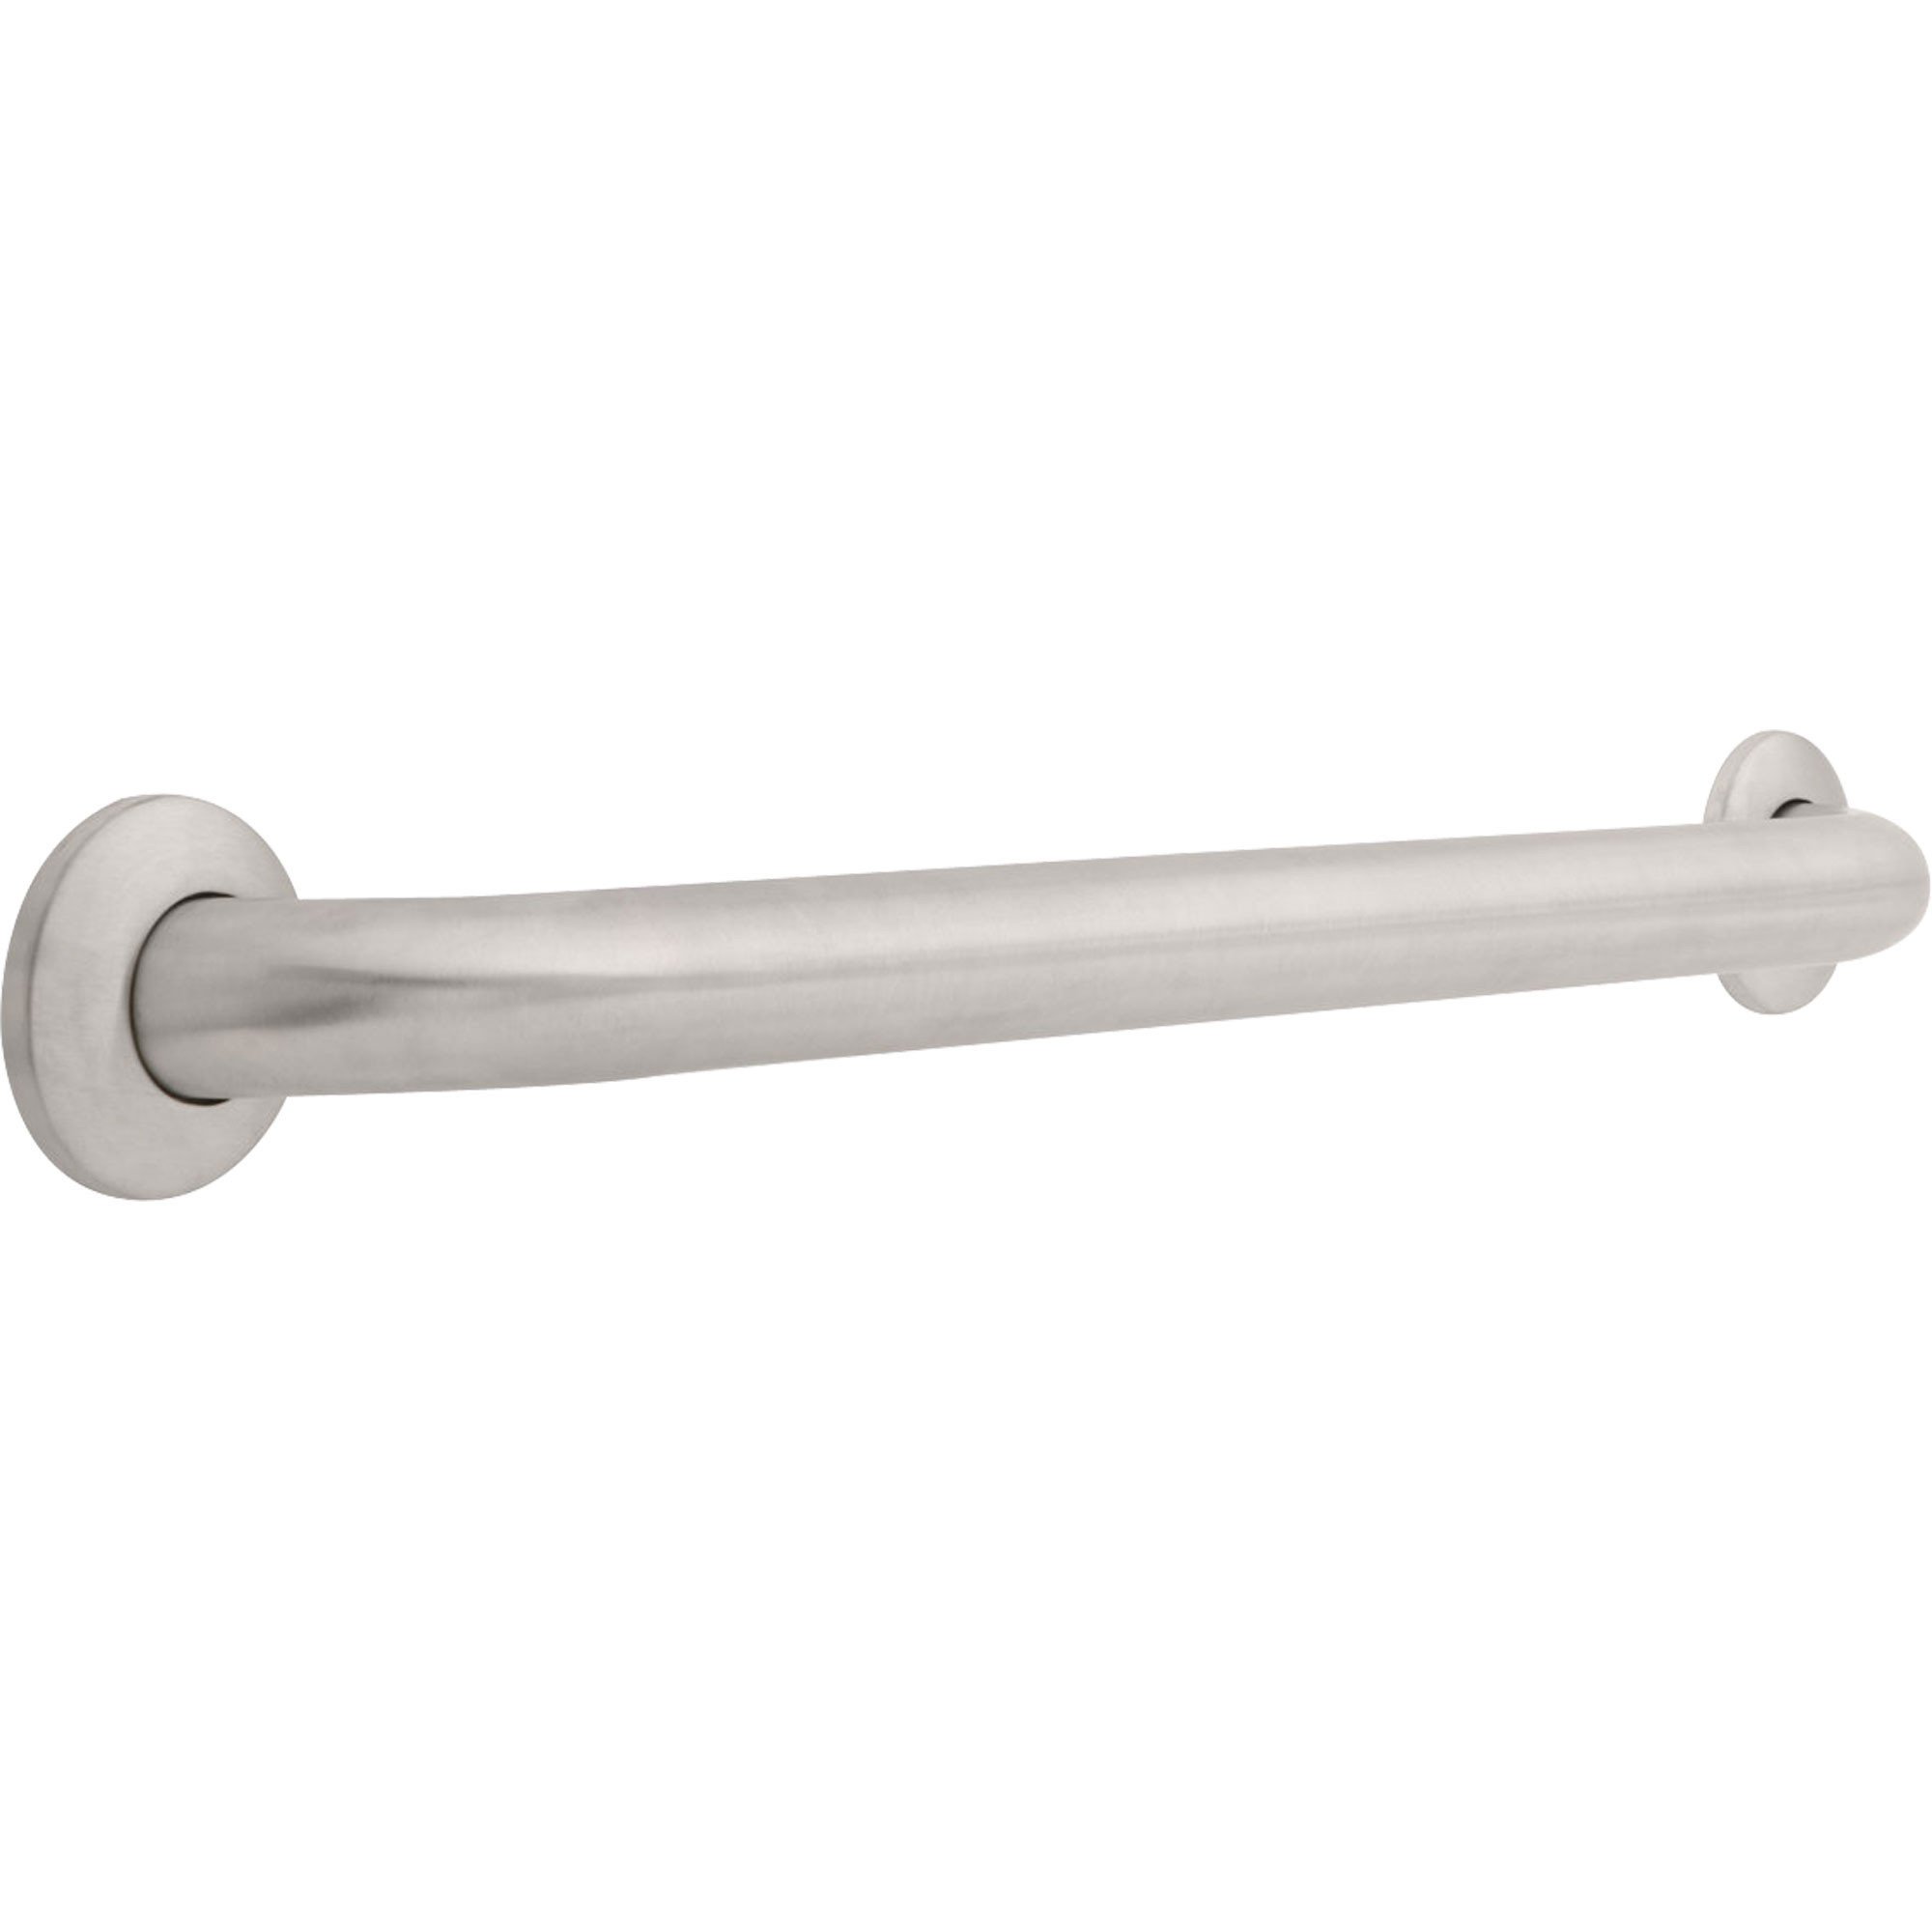 Delta ADA Complaint 1.5" x 24" Concealed Mounting Grab Bar in Stainless 567676